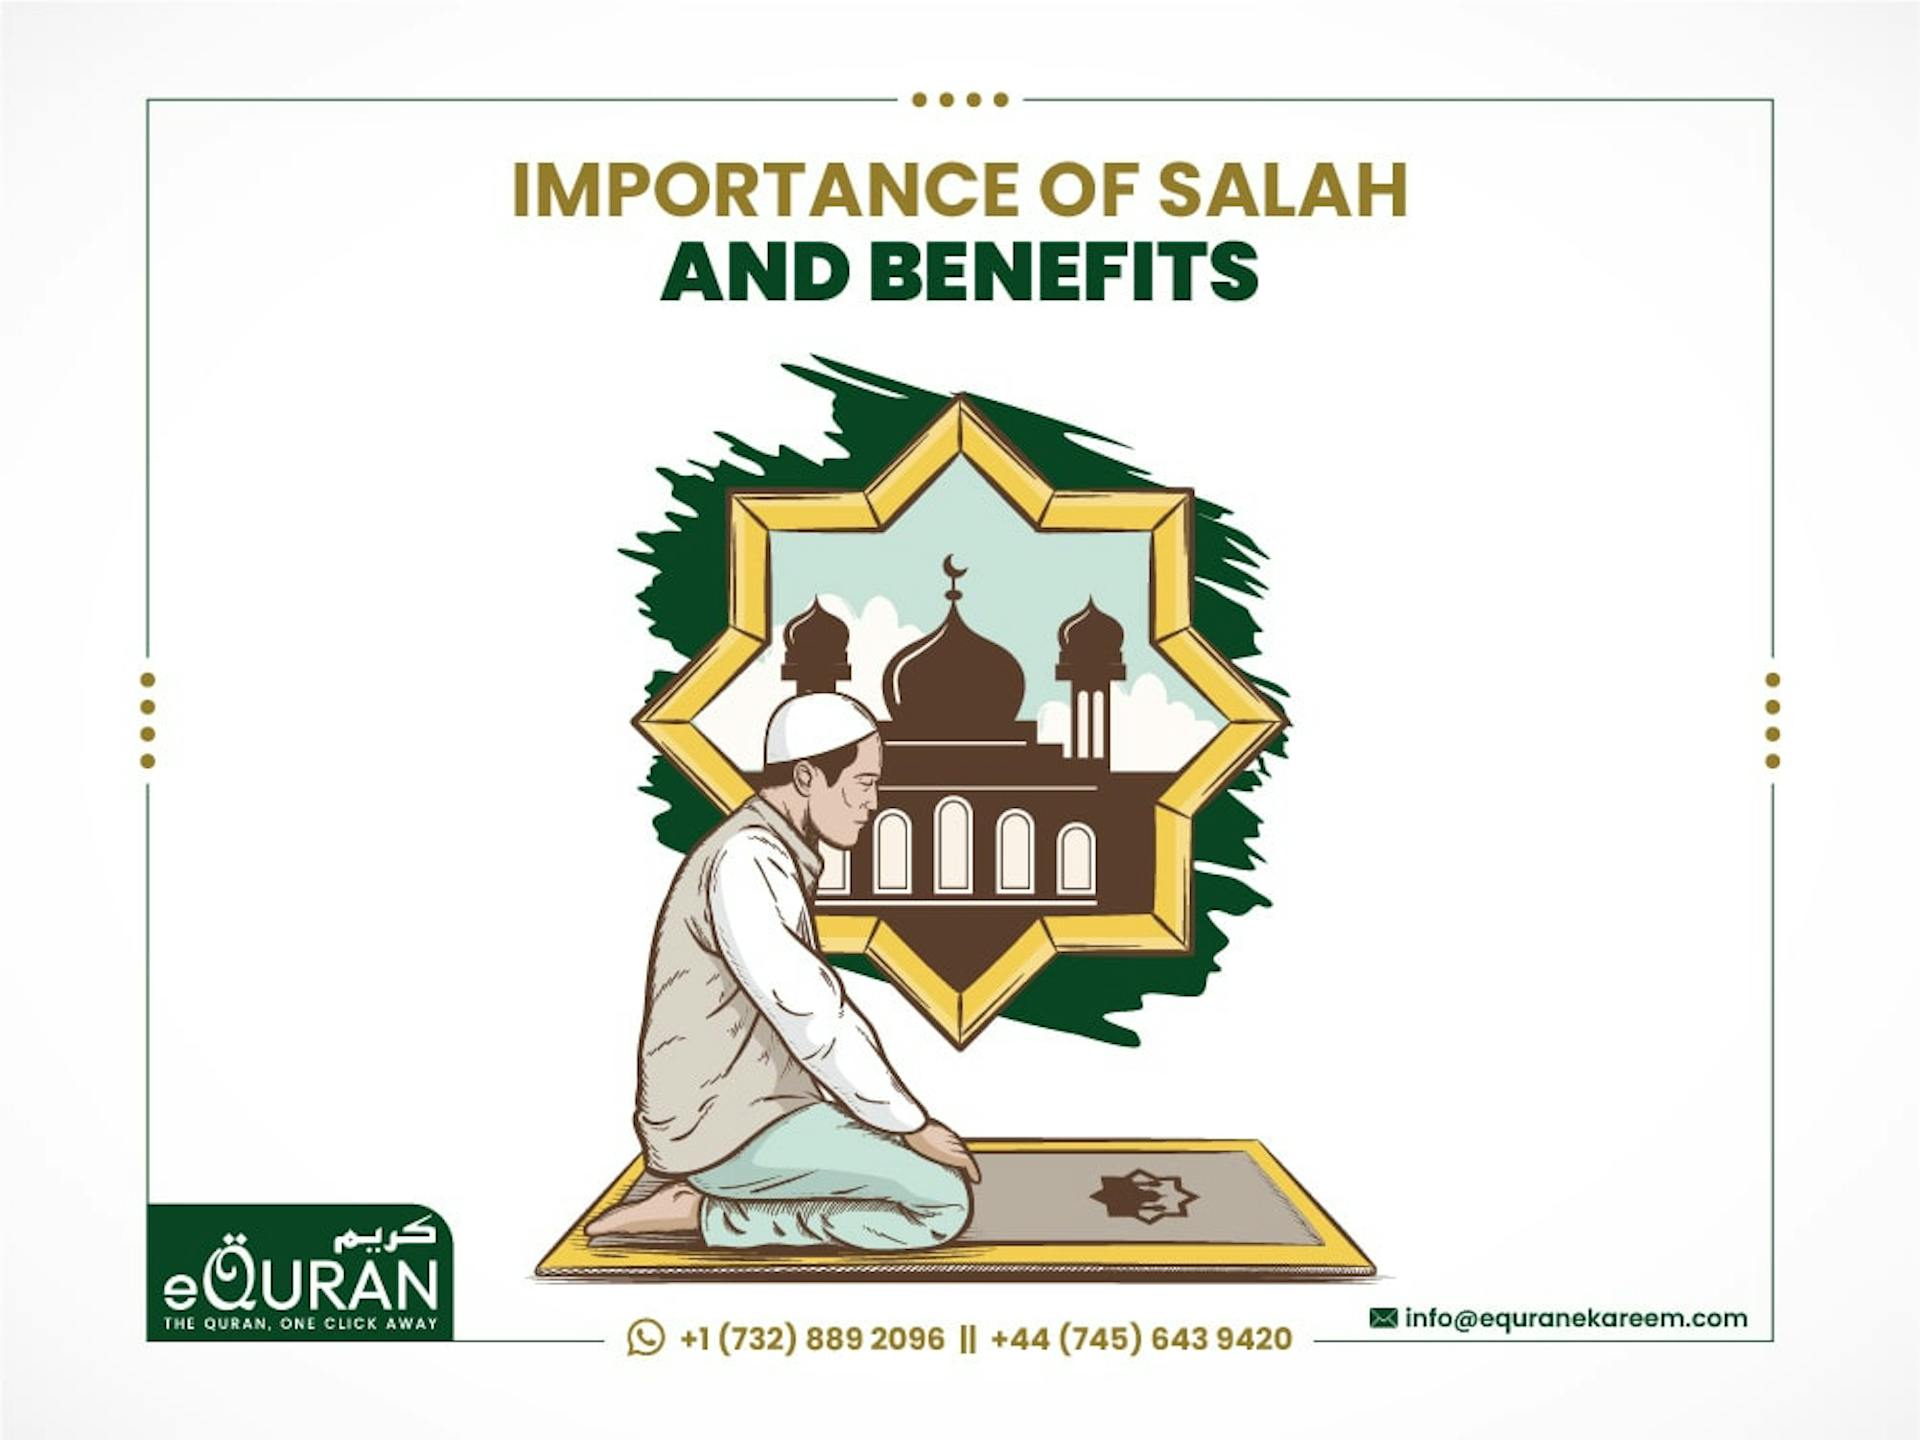 Importance of Salah and Benefits by eQuranekareem online Quran Academy